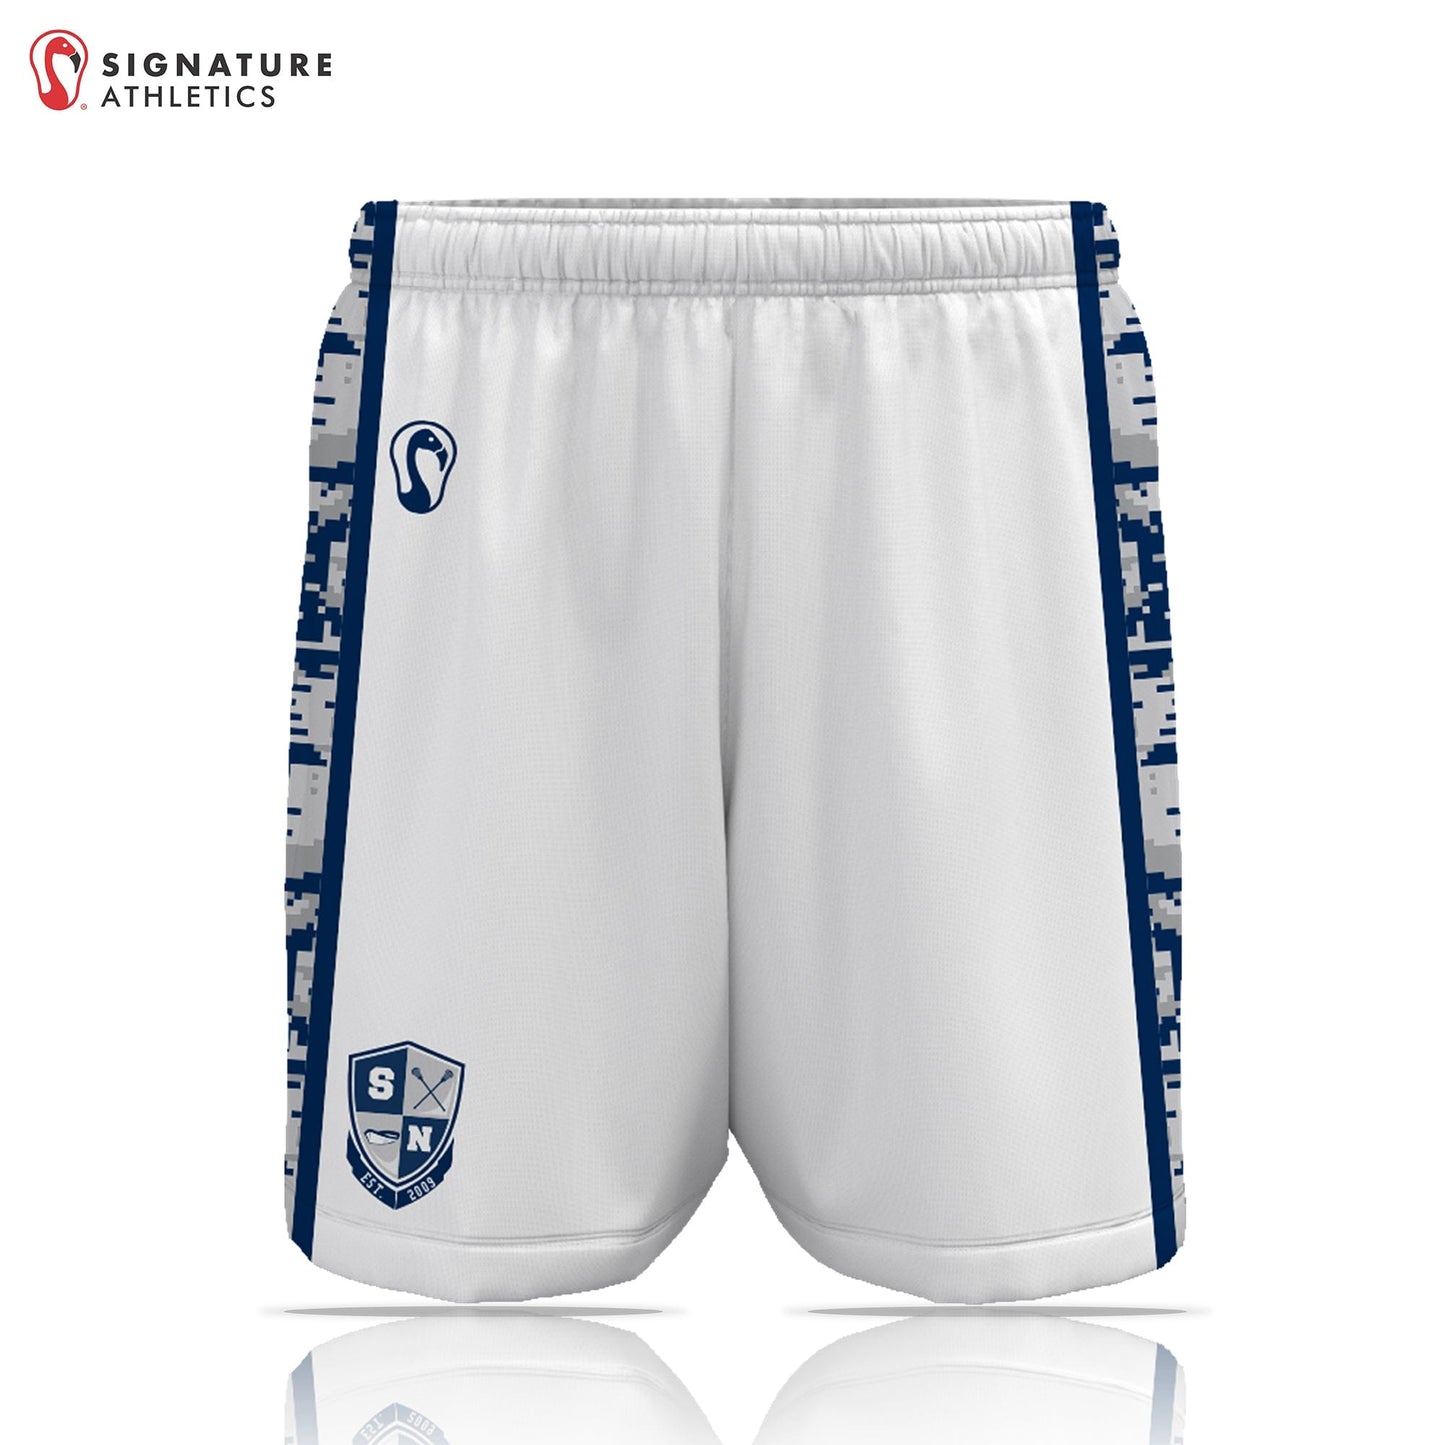 SNYL Team Swag Store Men's Performance Game Shorts (Sold Seperately):Boys U13 Signature Lacrosse